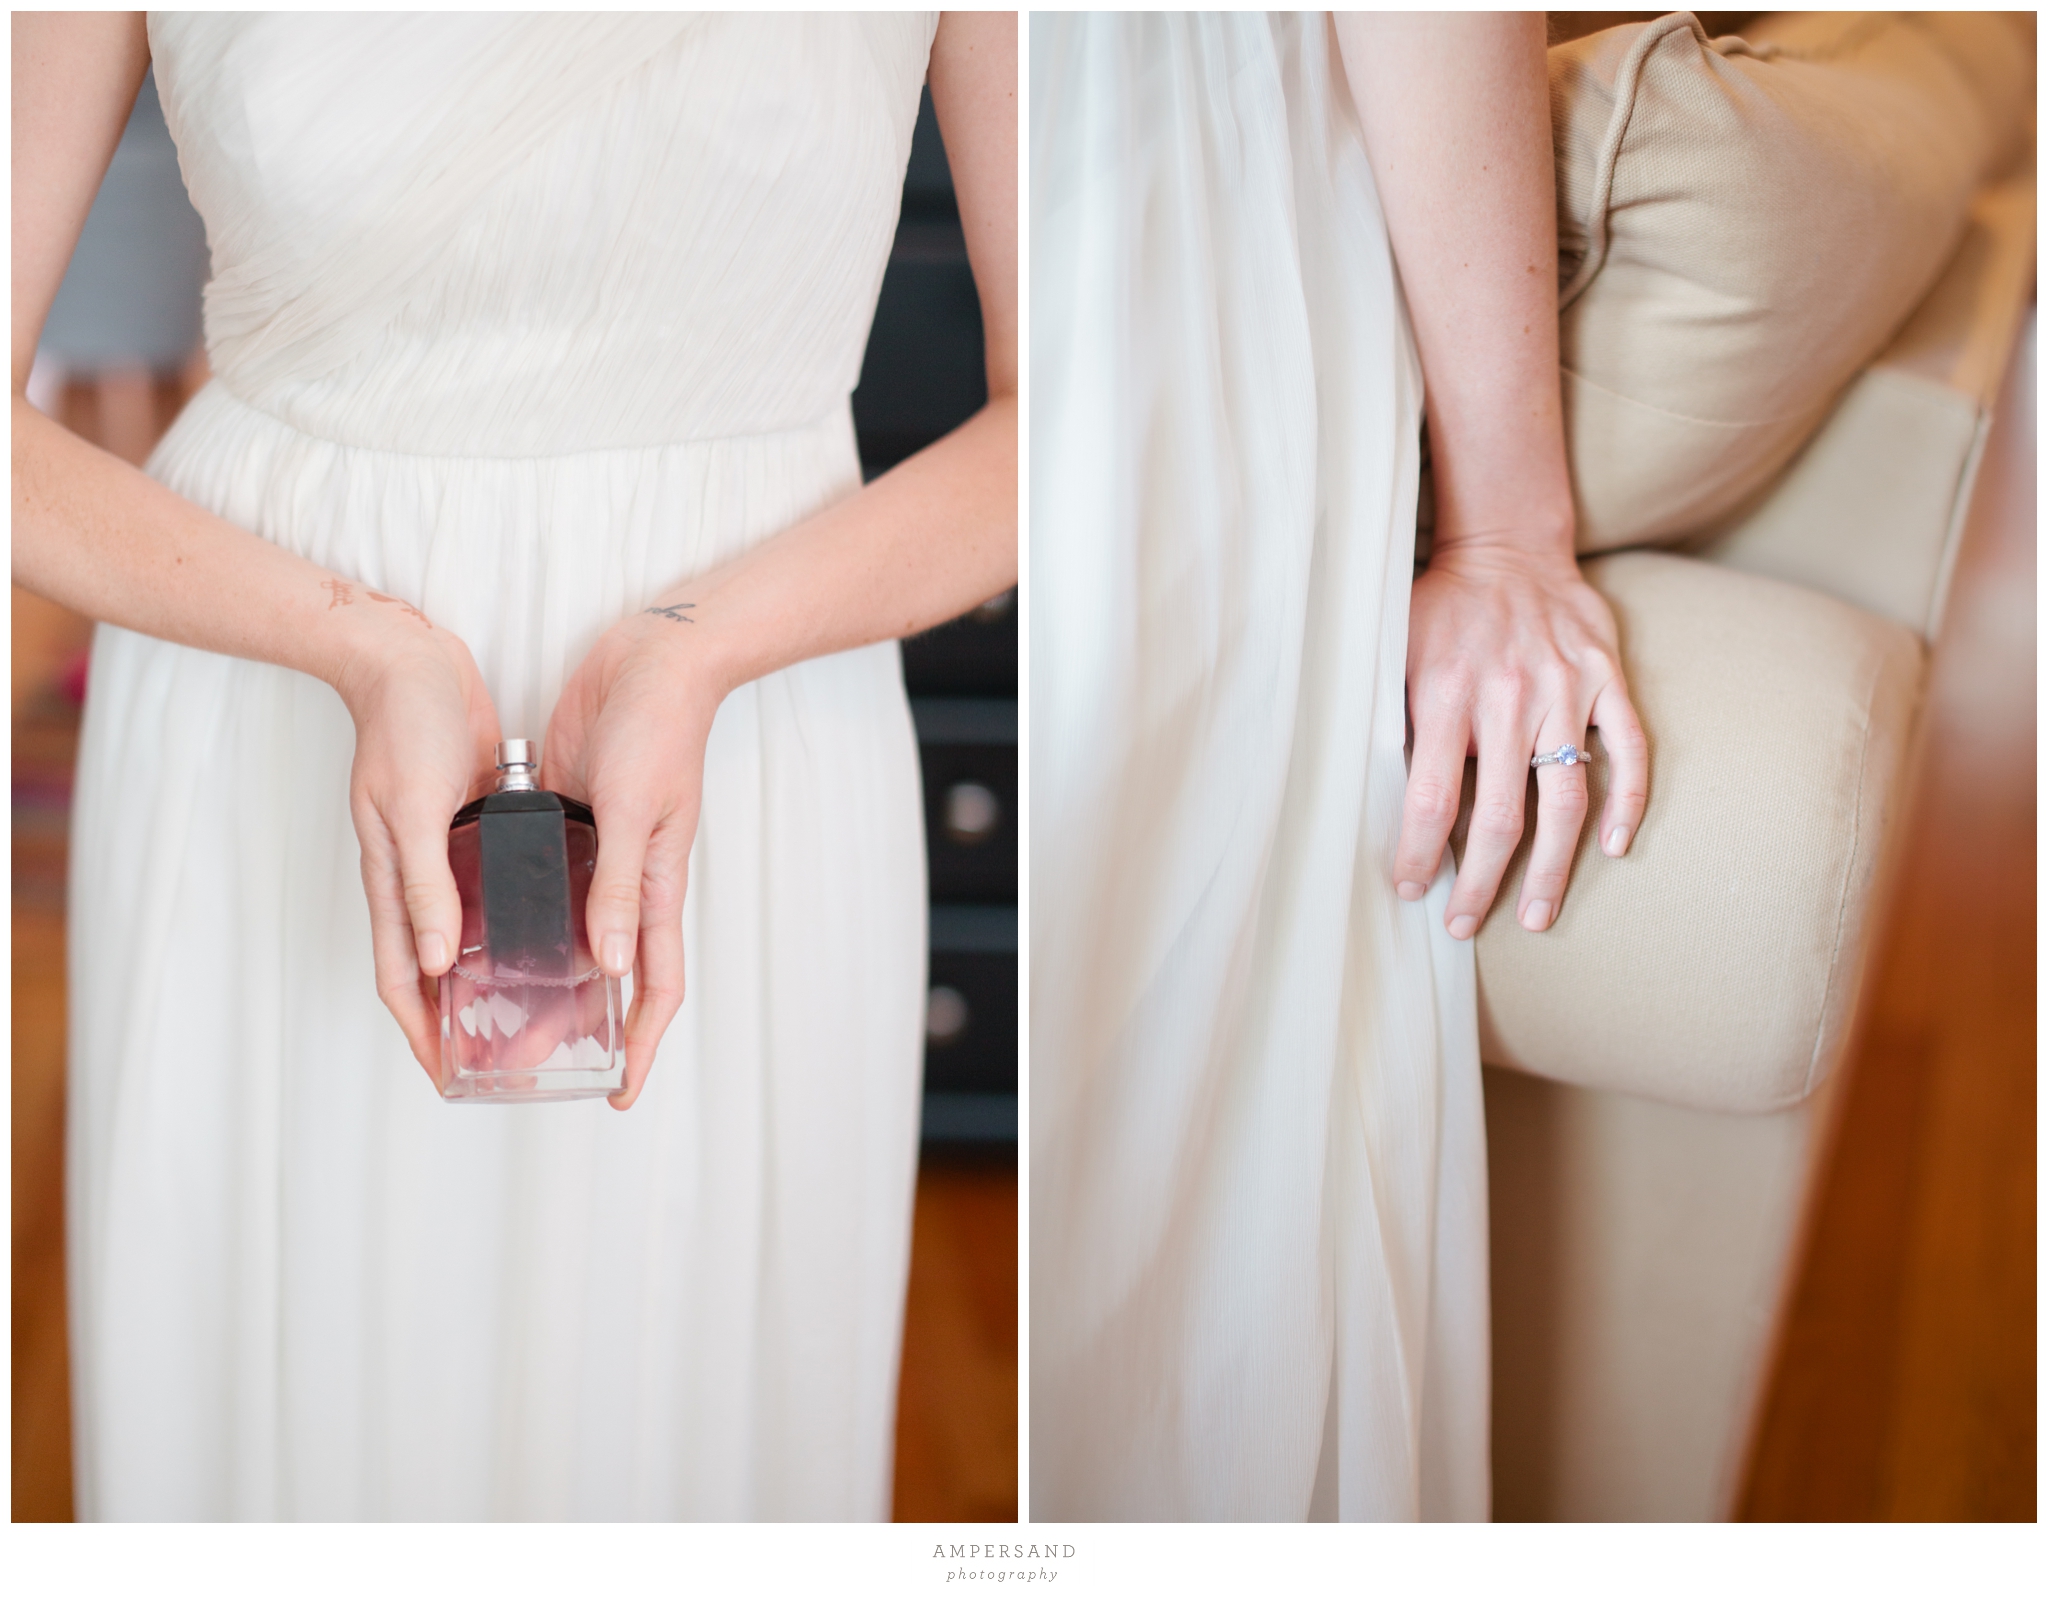 Details // Photos by Ampersand Photography